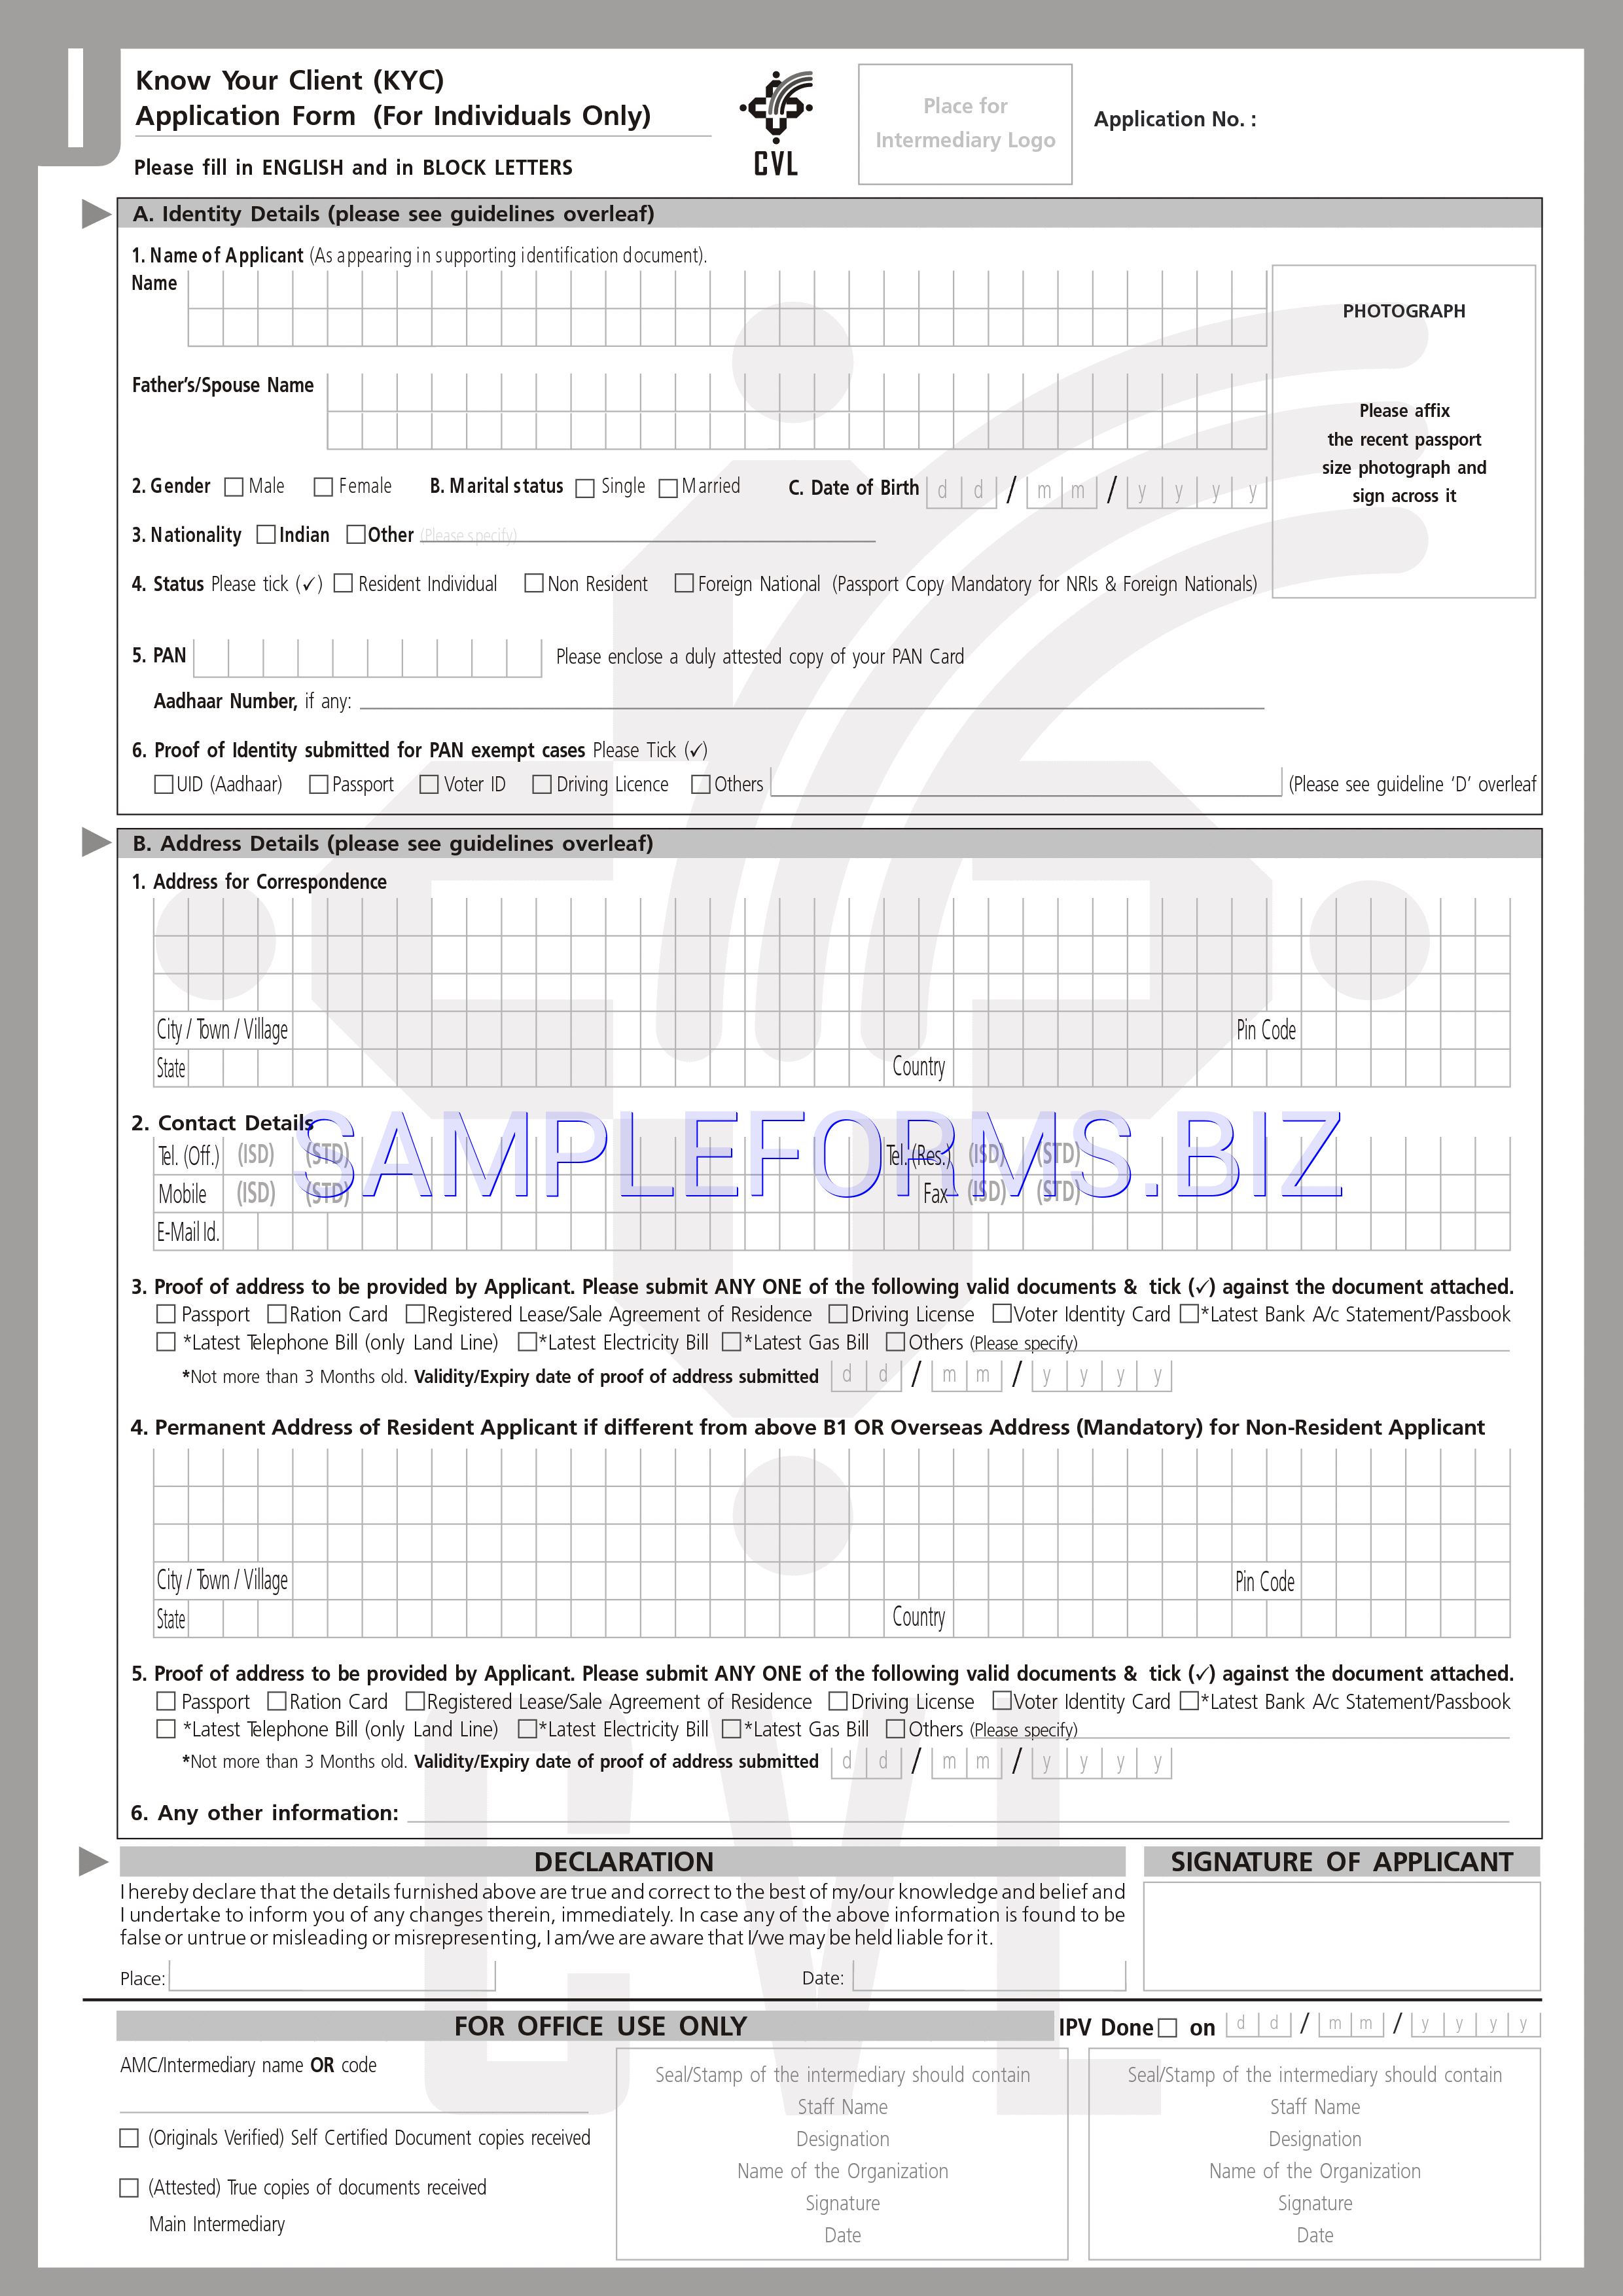 Preview free downloadable KYC Form in PDF (page 1)